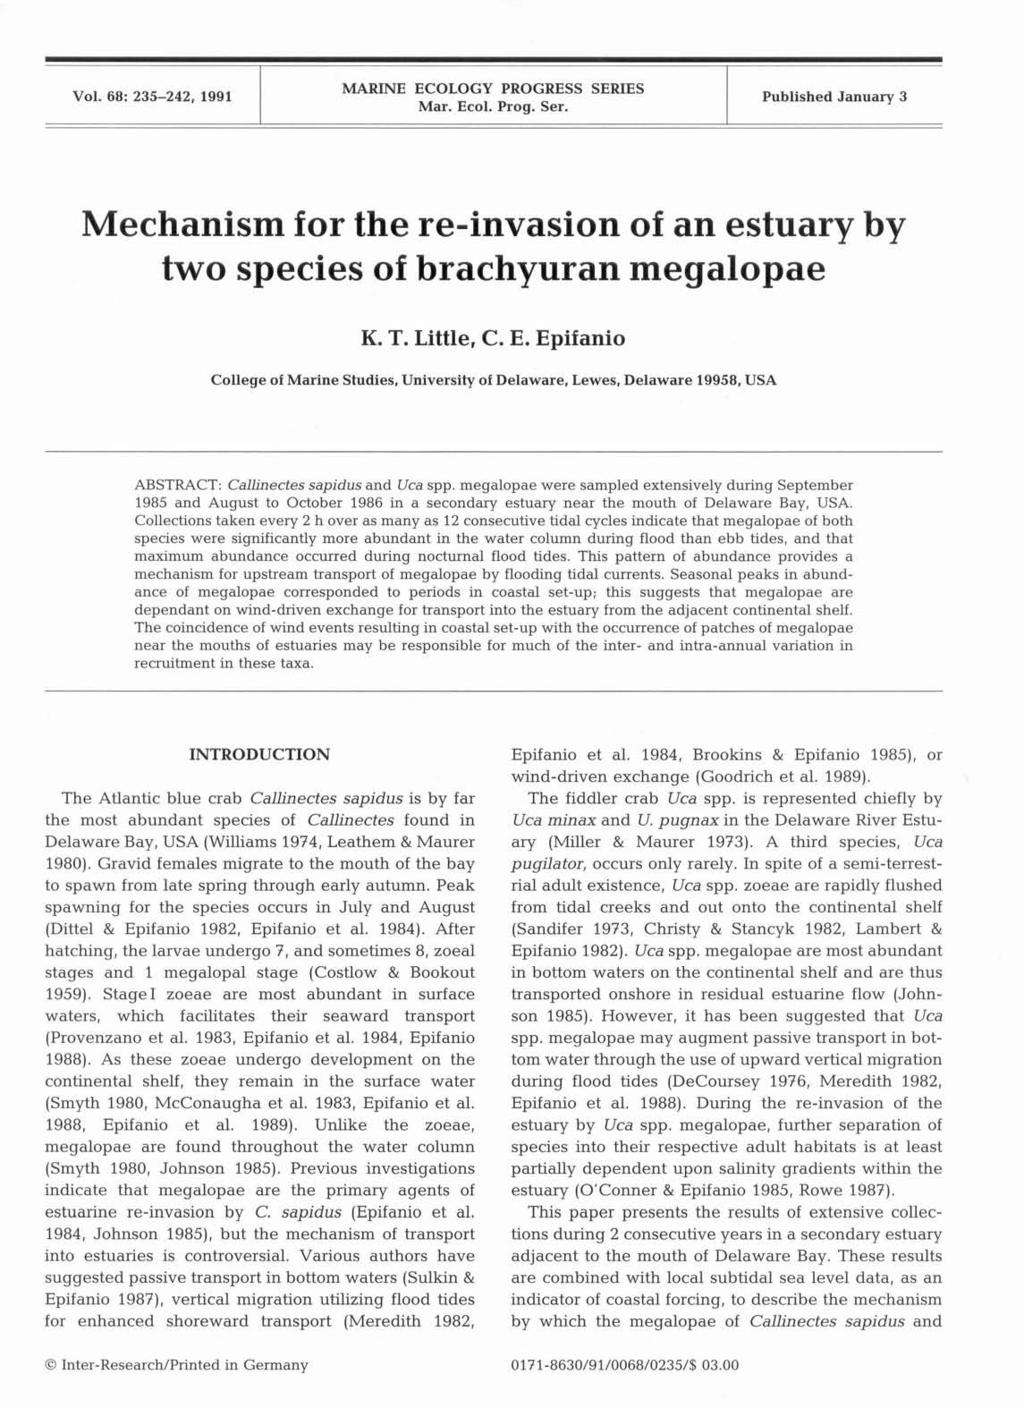 Vol. 68: 235-242, 1991 MARINE ECOLOGY PROGRESS SERIES Mar. Ecol. Prog. Ser. l Published January 3 Mechanism for the re-invasion of an estuary by two species of brachyuran megalopae K. T. Little, C. E. Epifanio College of Marine Studies, University of Delaware, Lewes.